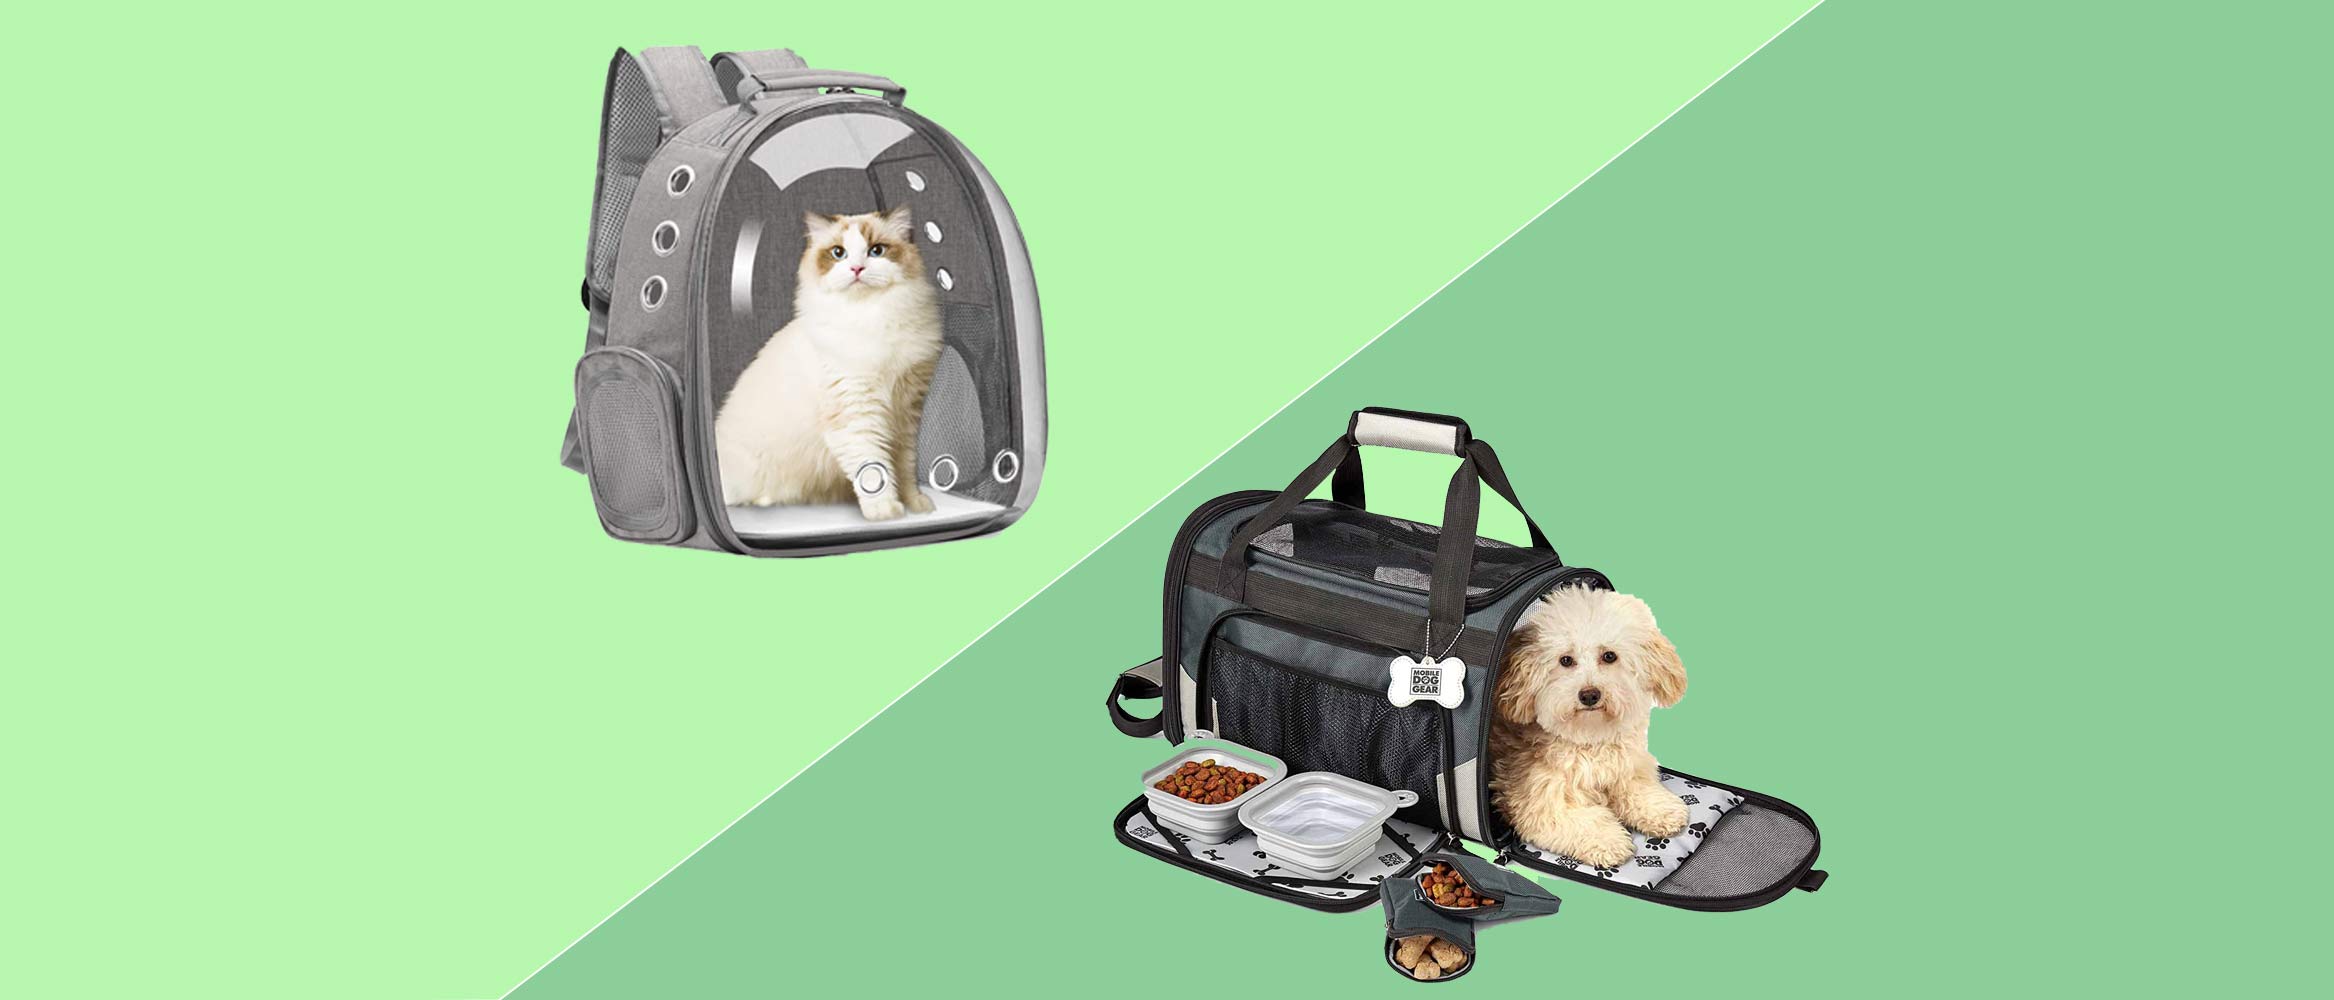 Amazon.com : Pet Life Exquisite Handbag Cat and Dog Carrier - Fashion Pet  Carrier and Dog Purse for Small and Medium Dogs and Cats : Pet Supplies